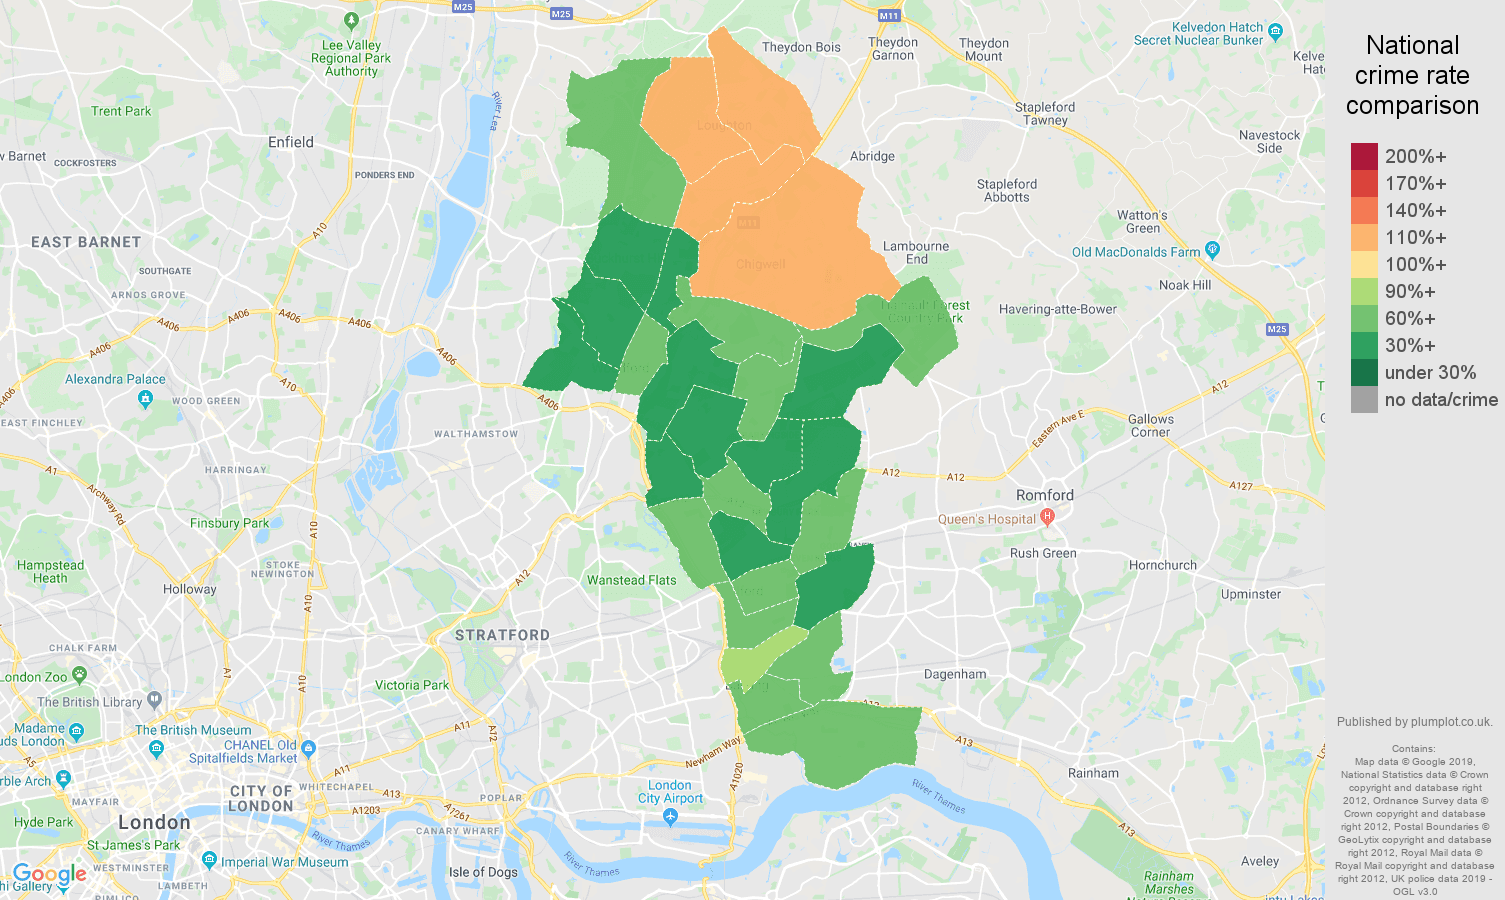 Ilford other crime rate comparison map